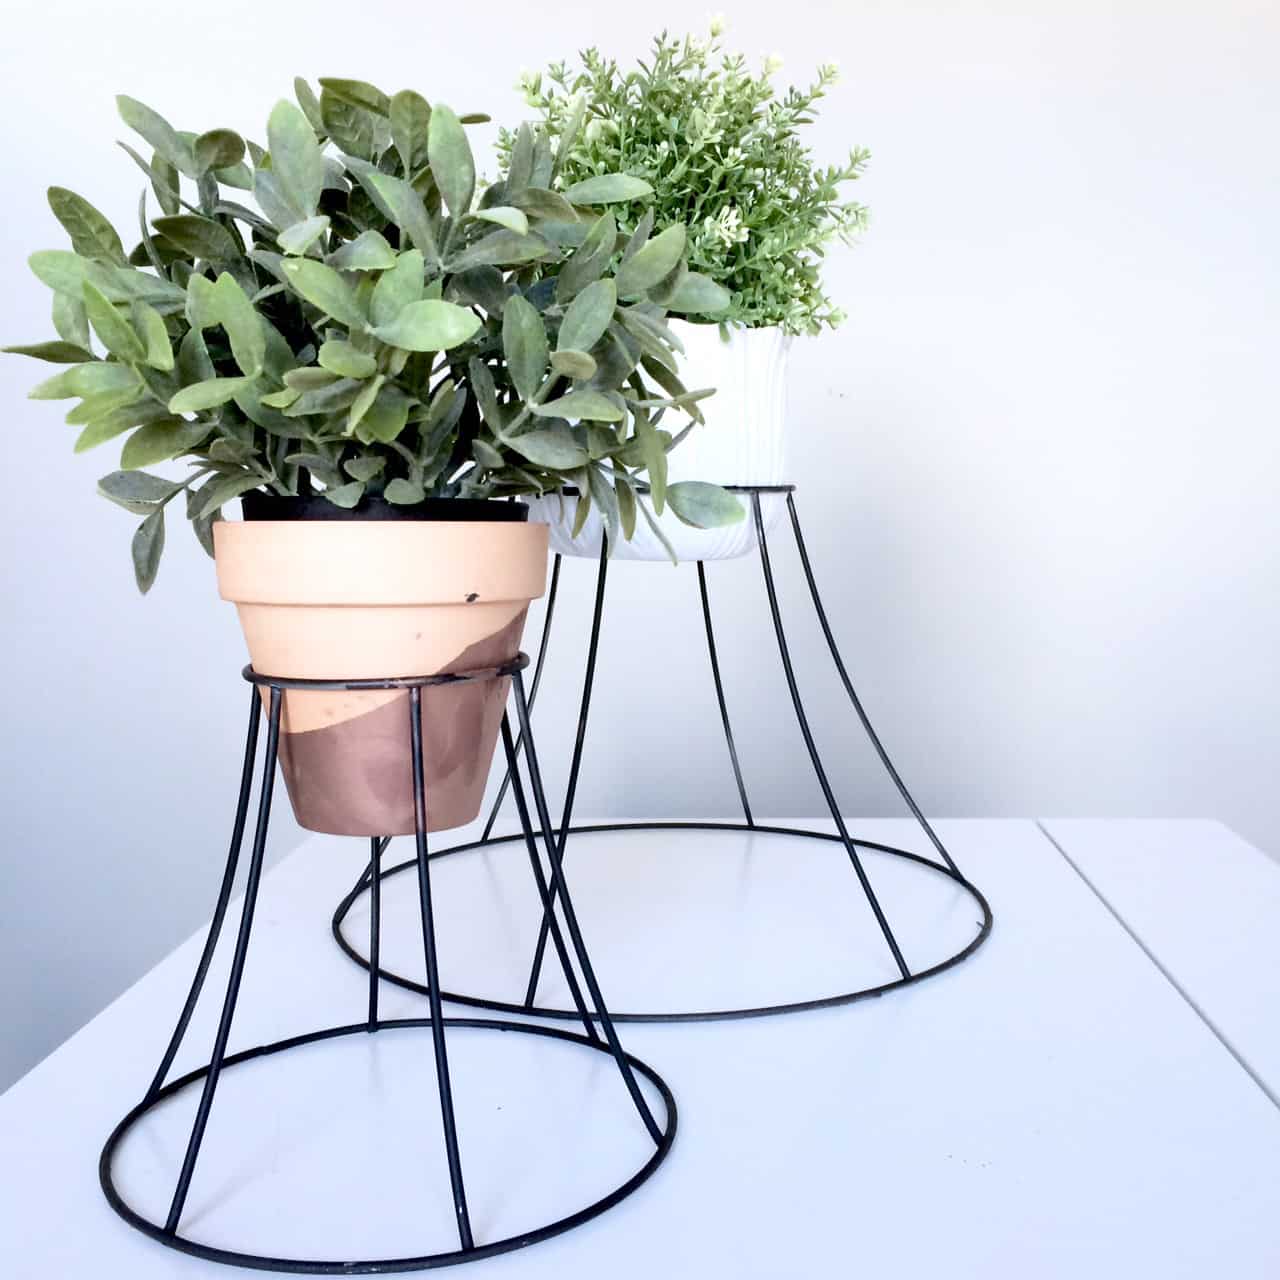 Upcycled black lampshade as plant holders.